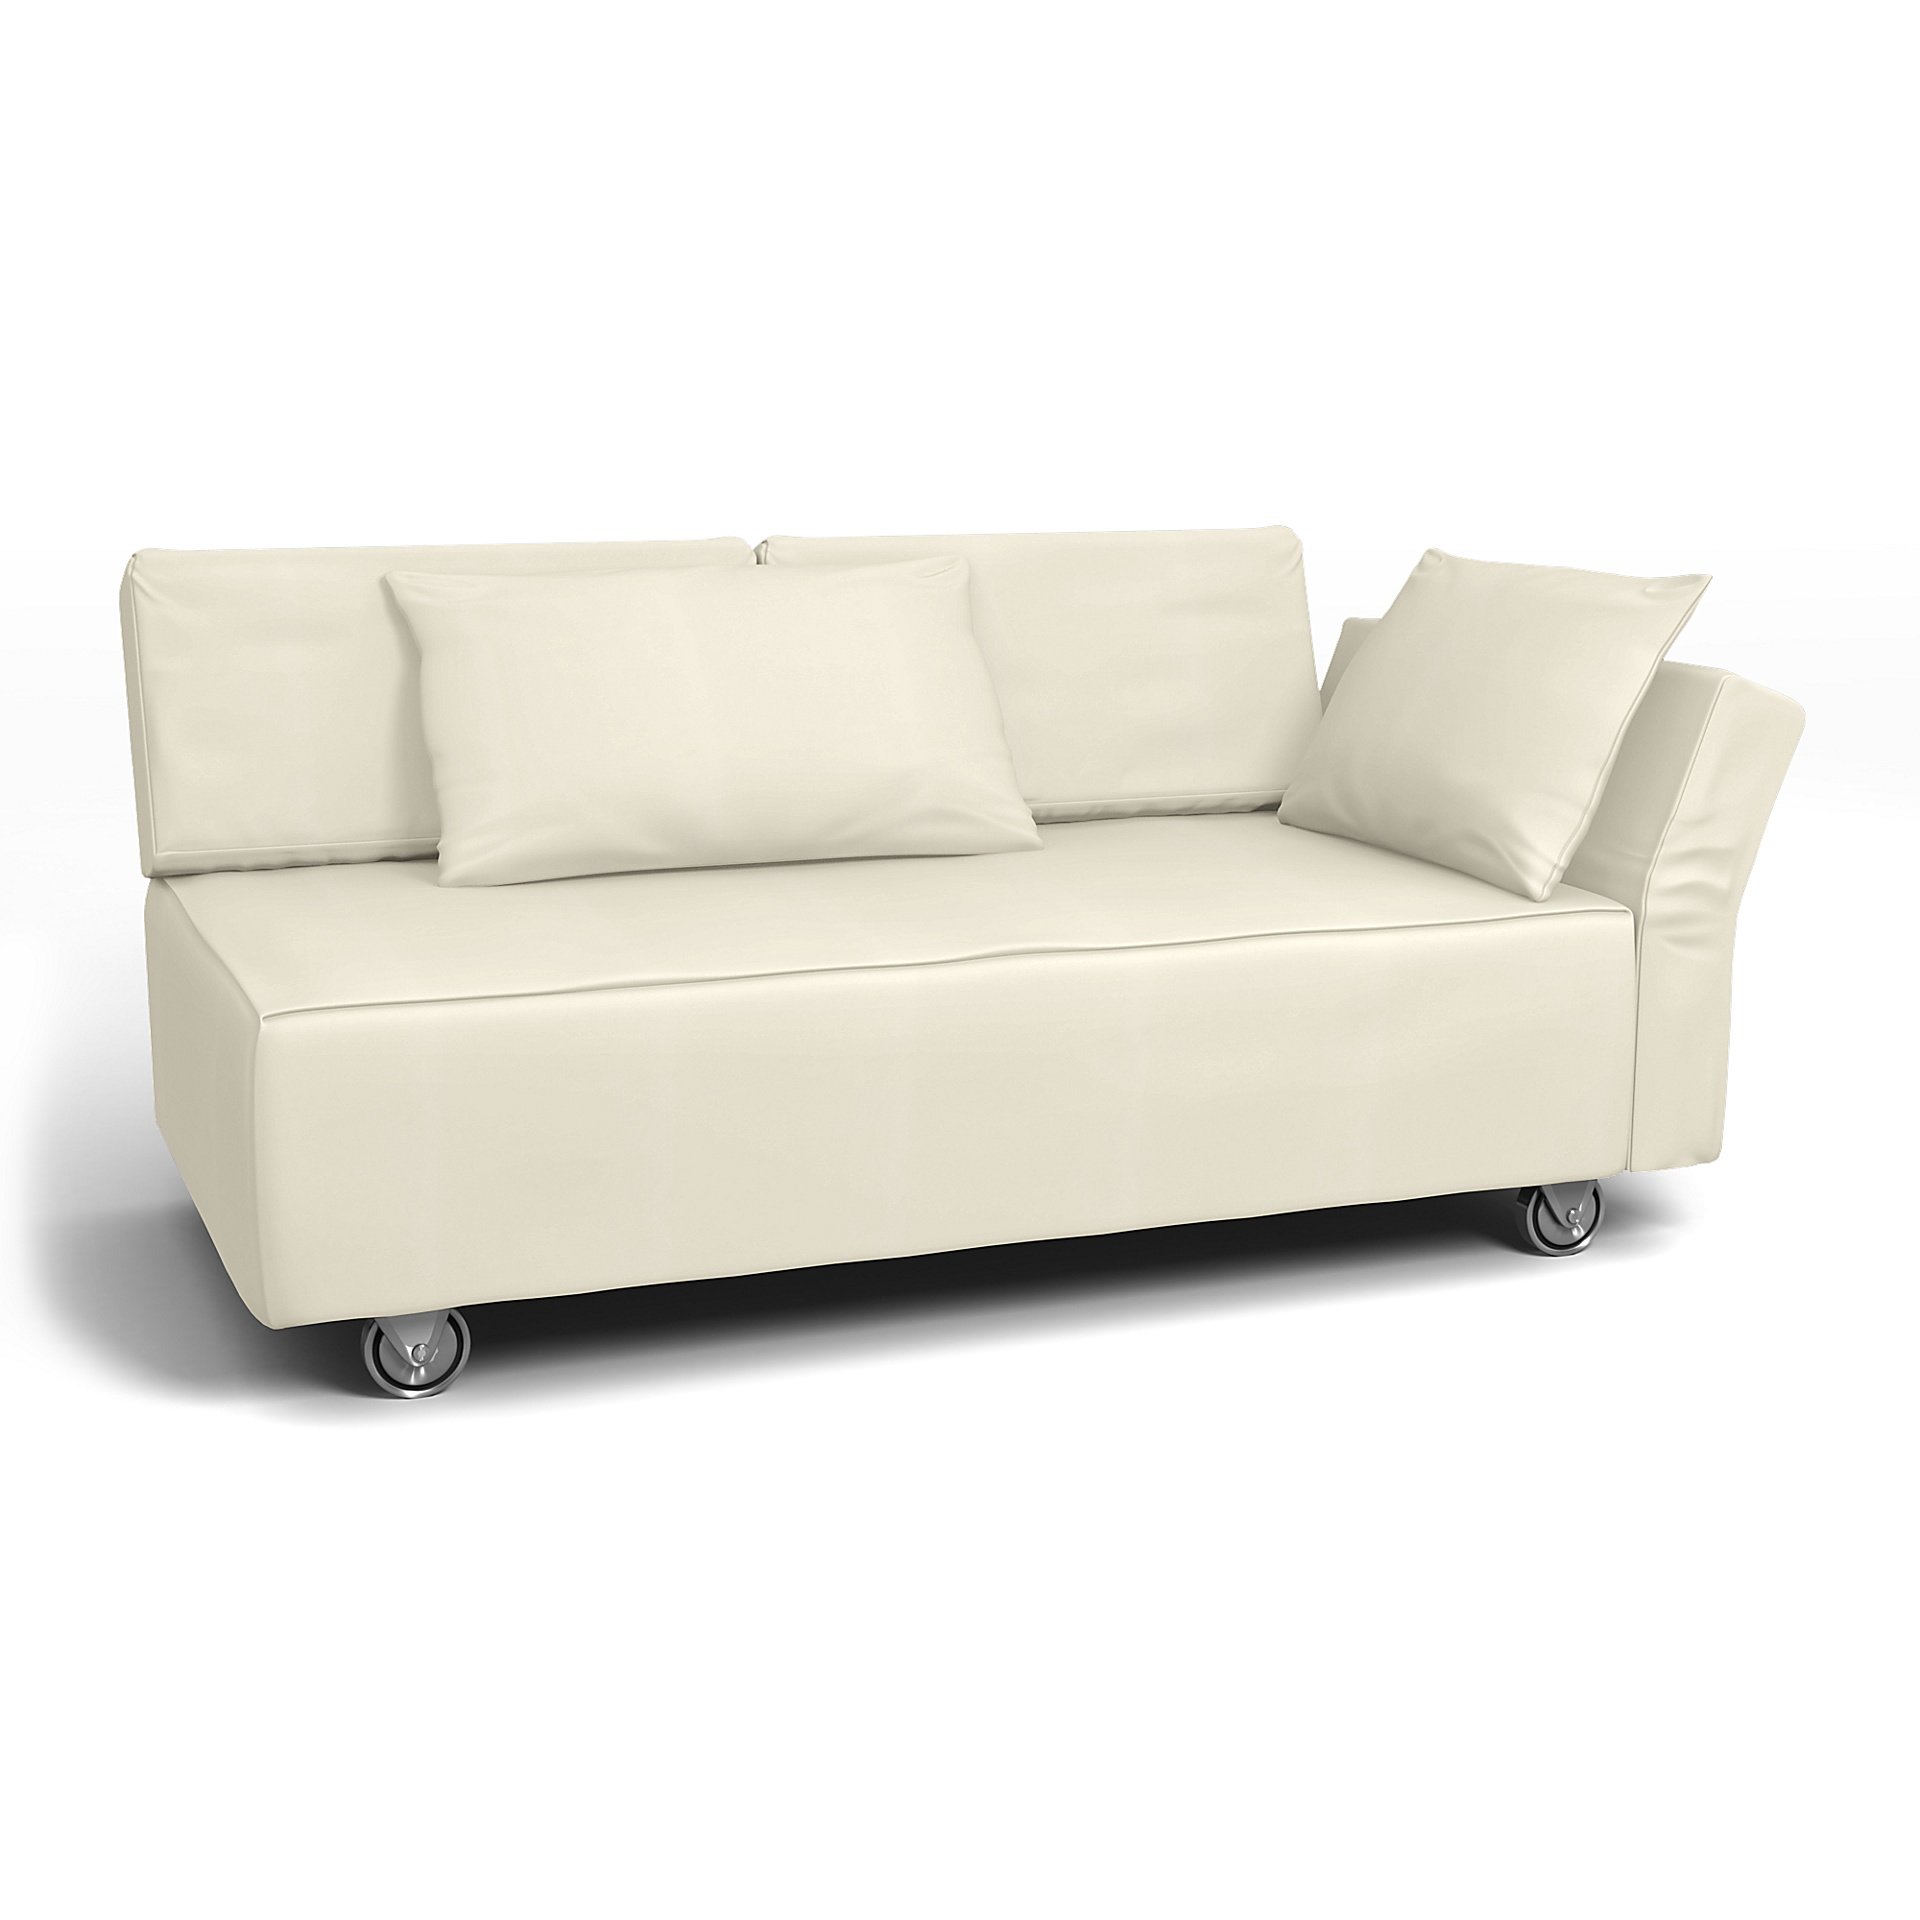 IKEA - Falsterbo 2 Seat Sofa with Right Arm Cover, Tofu, Cotton - Bemz